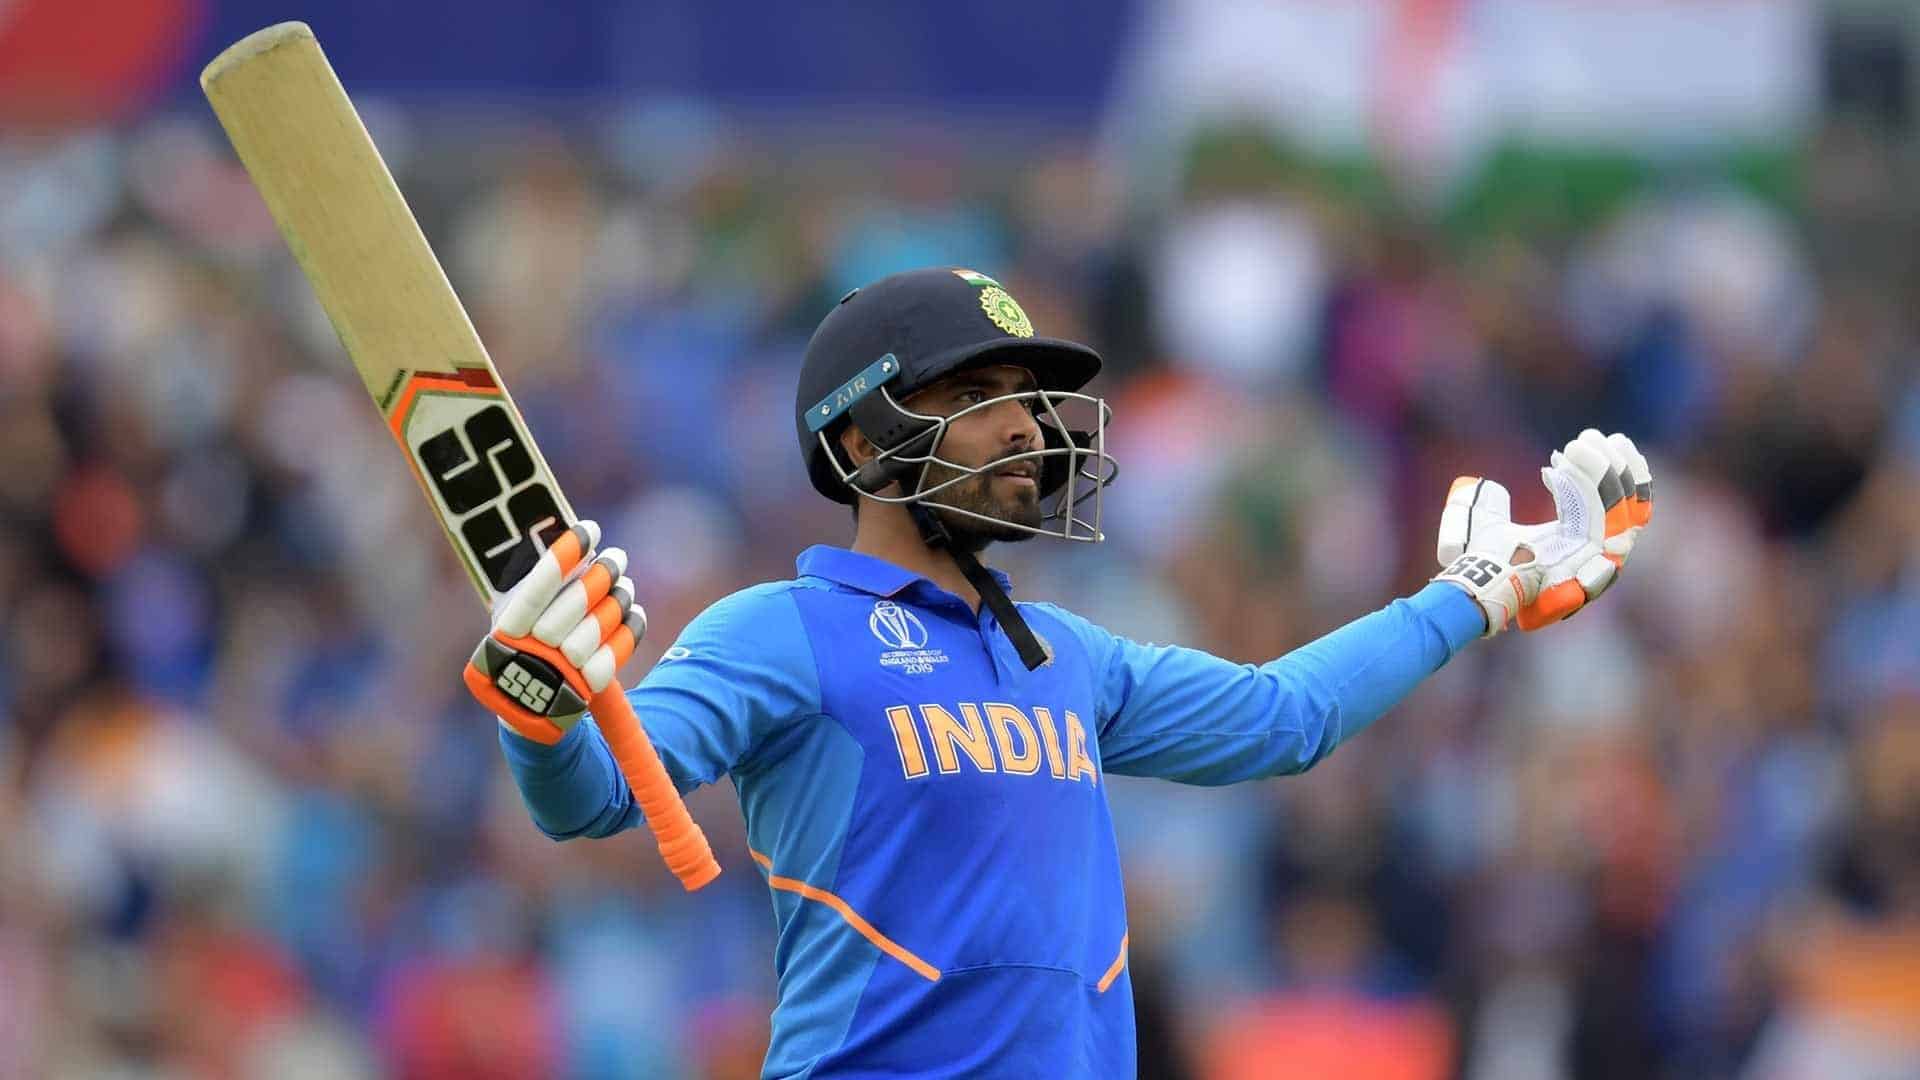 Ravindra Jadeja Revealed Who He Targeted During His Famous Sword Celebration In World Cup 2019 Semi-Final